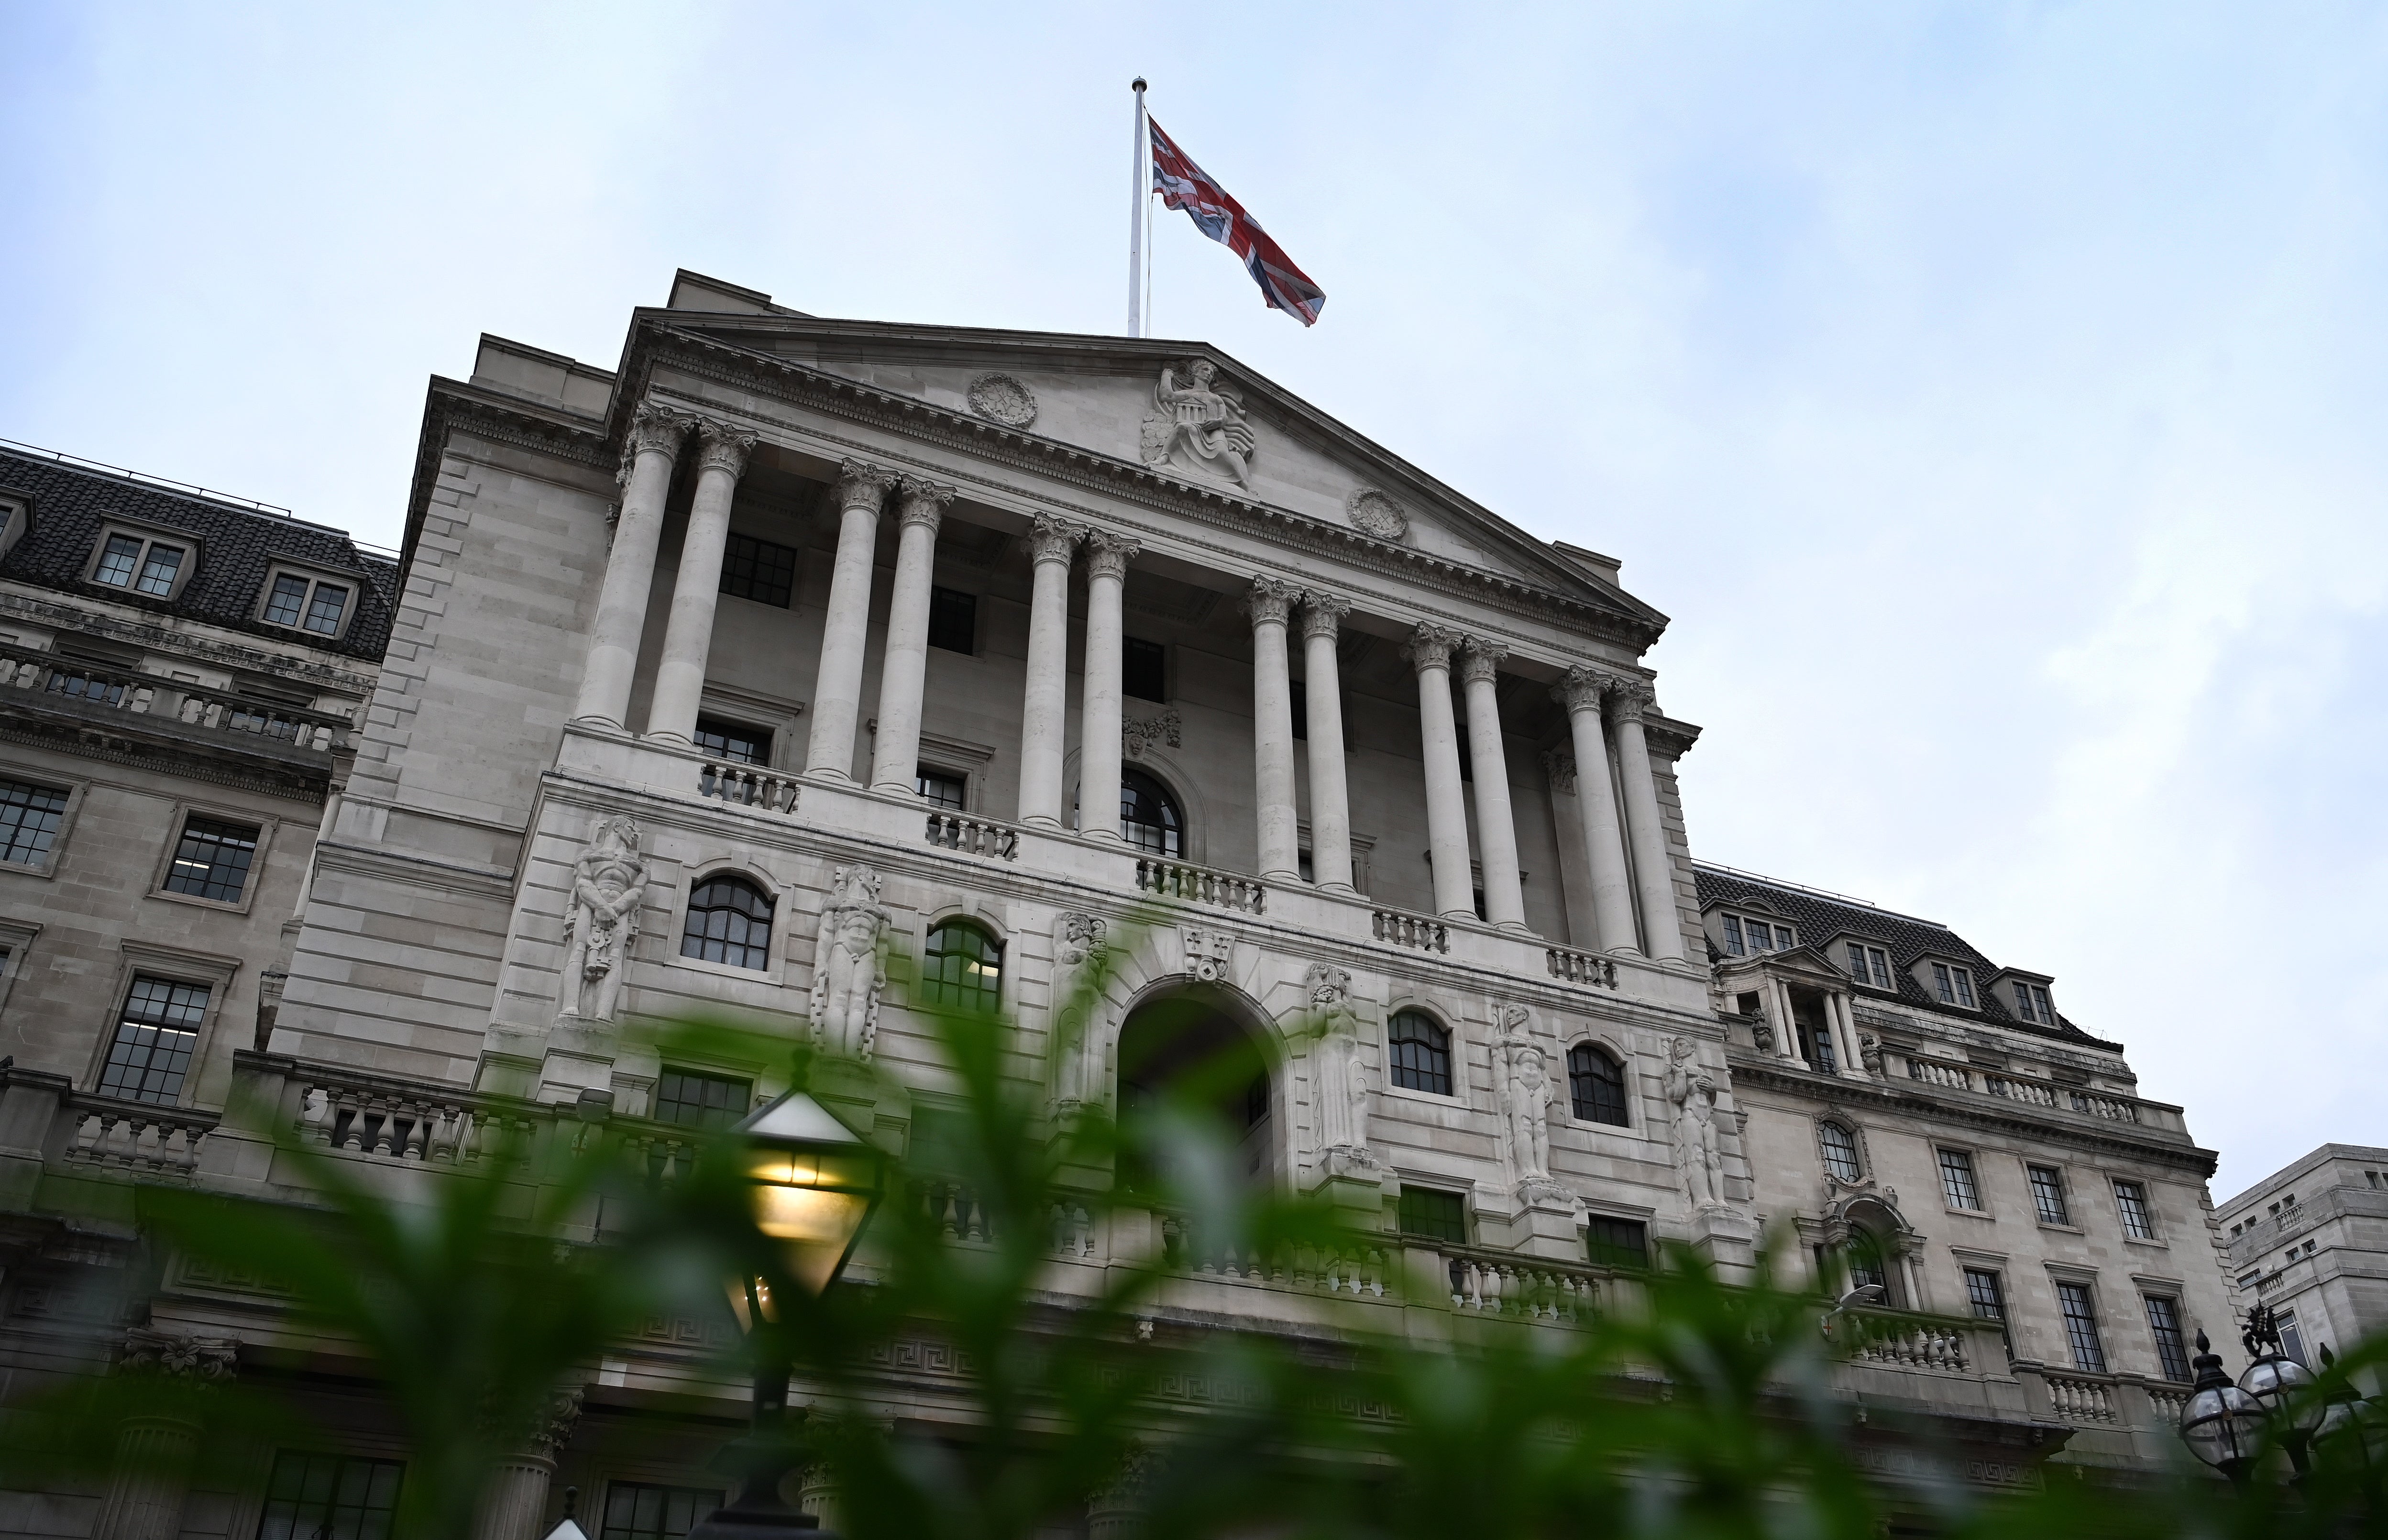 The Bank of England has lent its support to the National Bank of Ukraine.